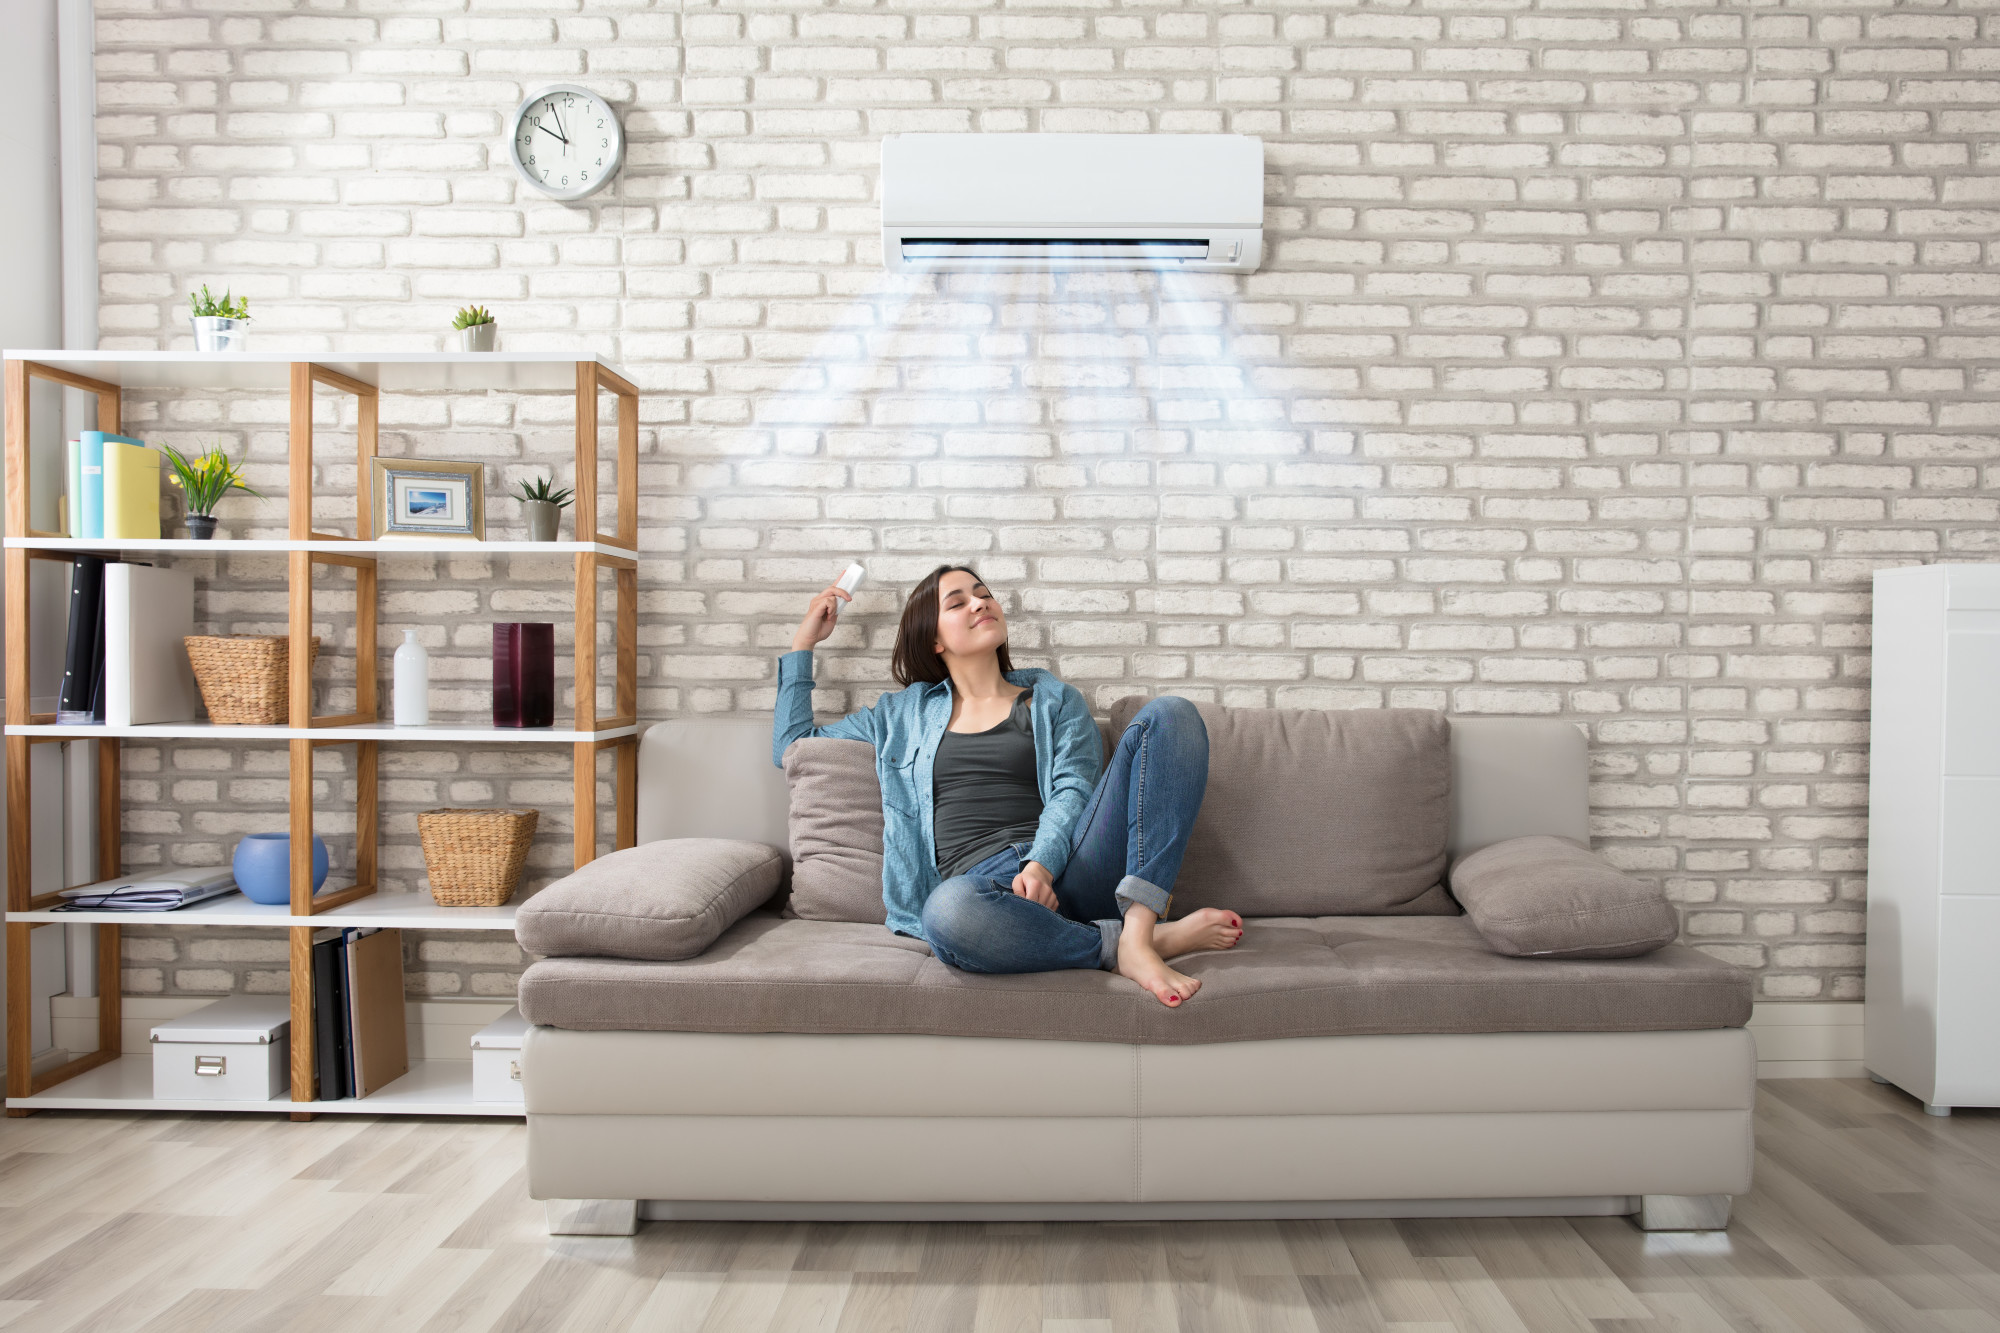 Do you need help with finding an AC installation service? You can read about some important things to consider when making your decision.